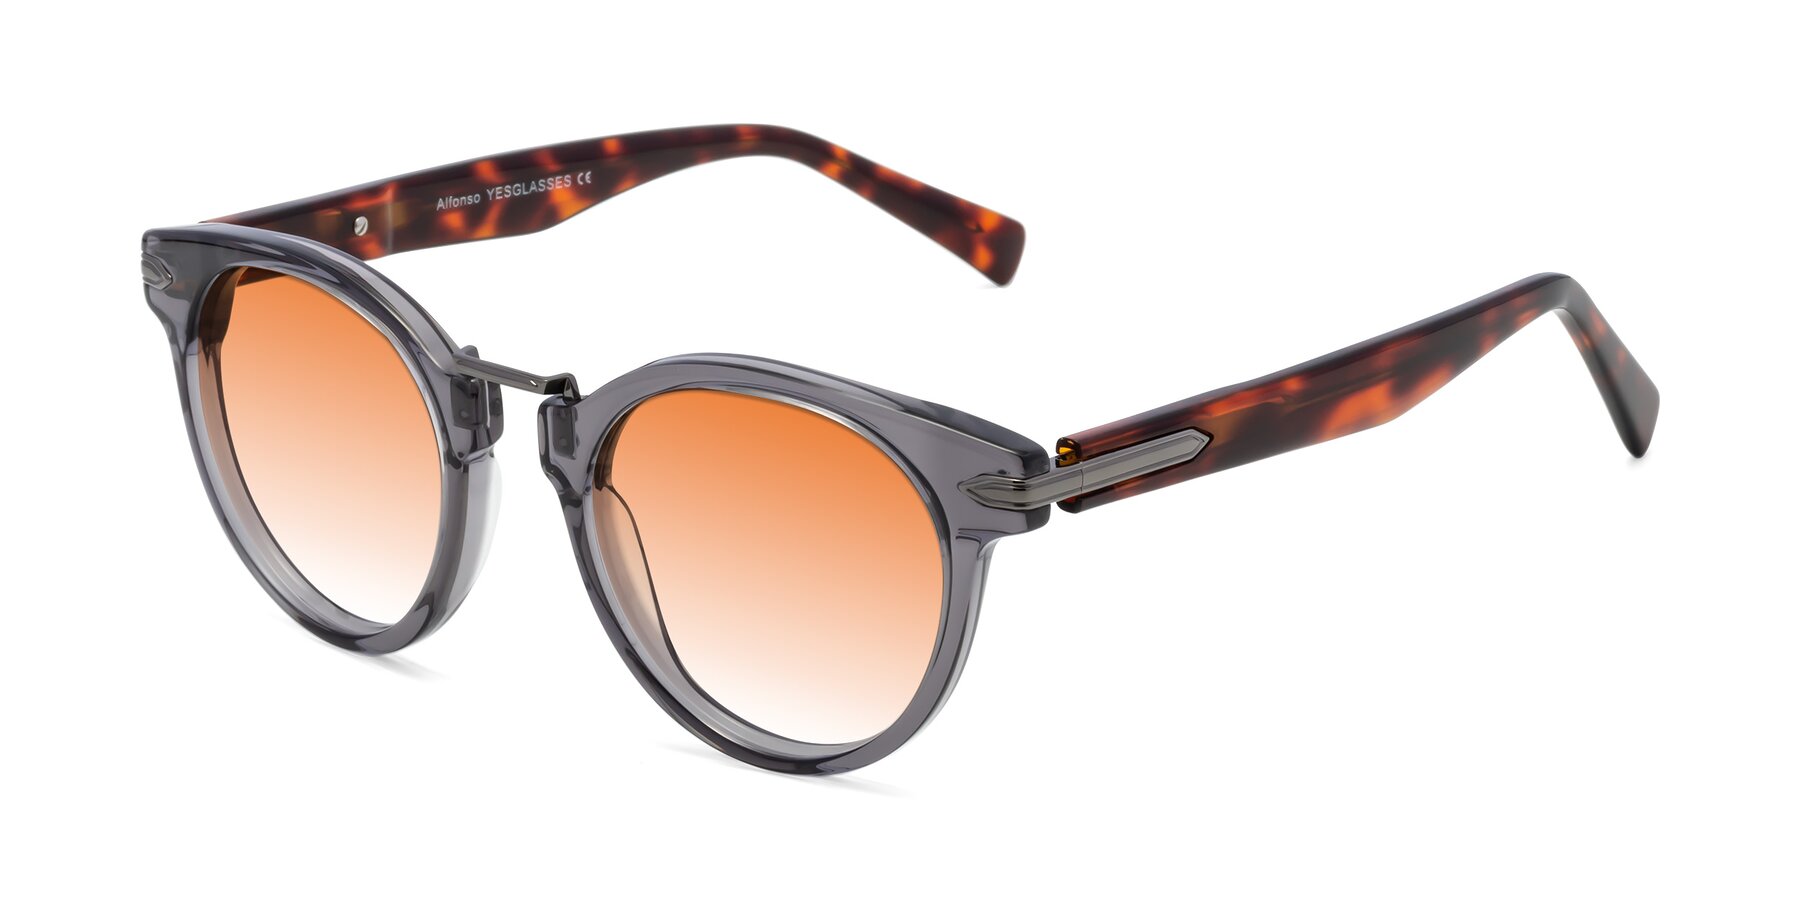 Angle of Alfonso in Gray /Tortoise with Orange Gradient Lenses